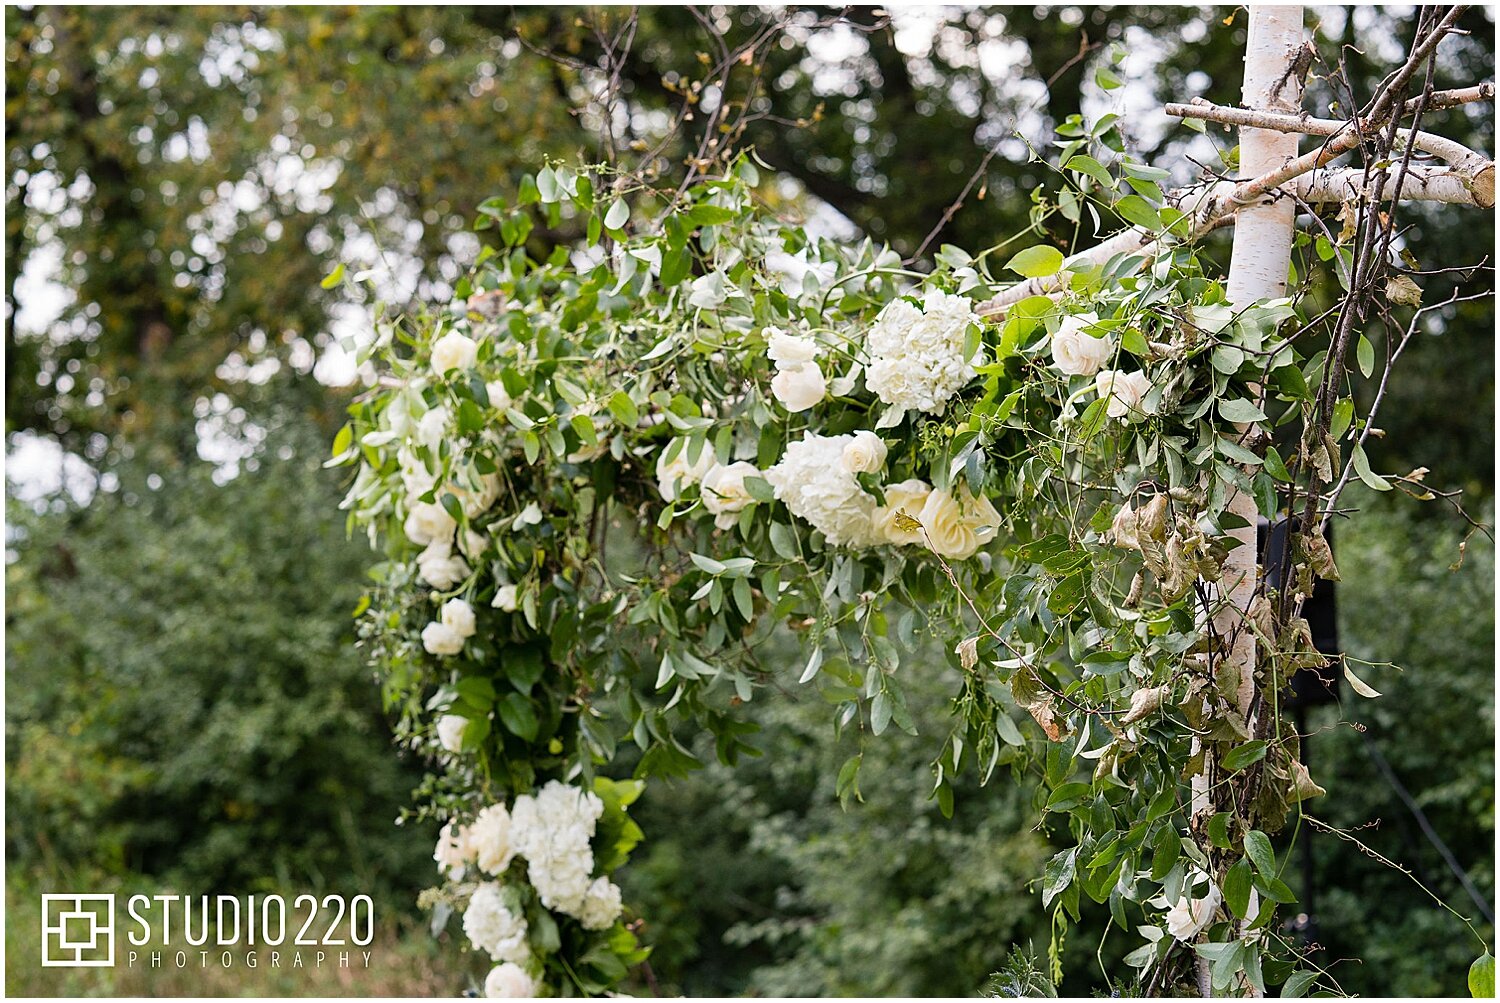  Greenery with white flowers for wedding arch 